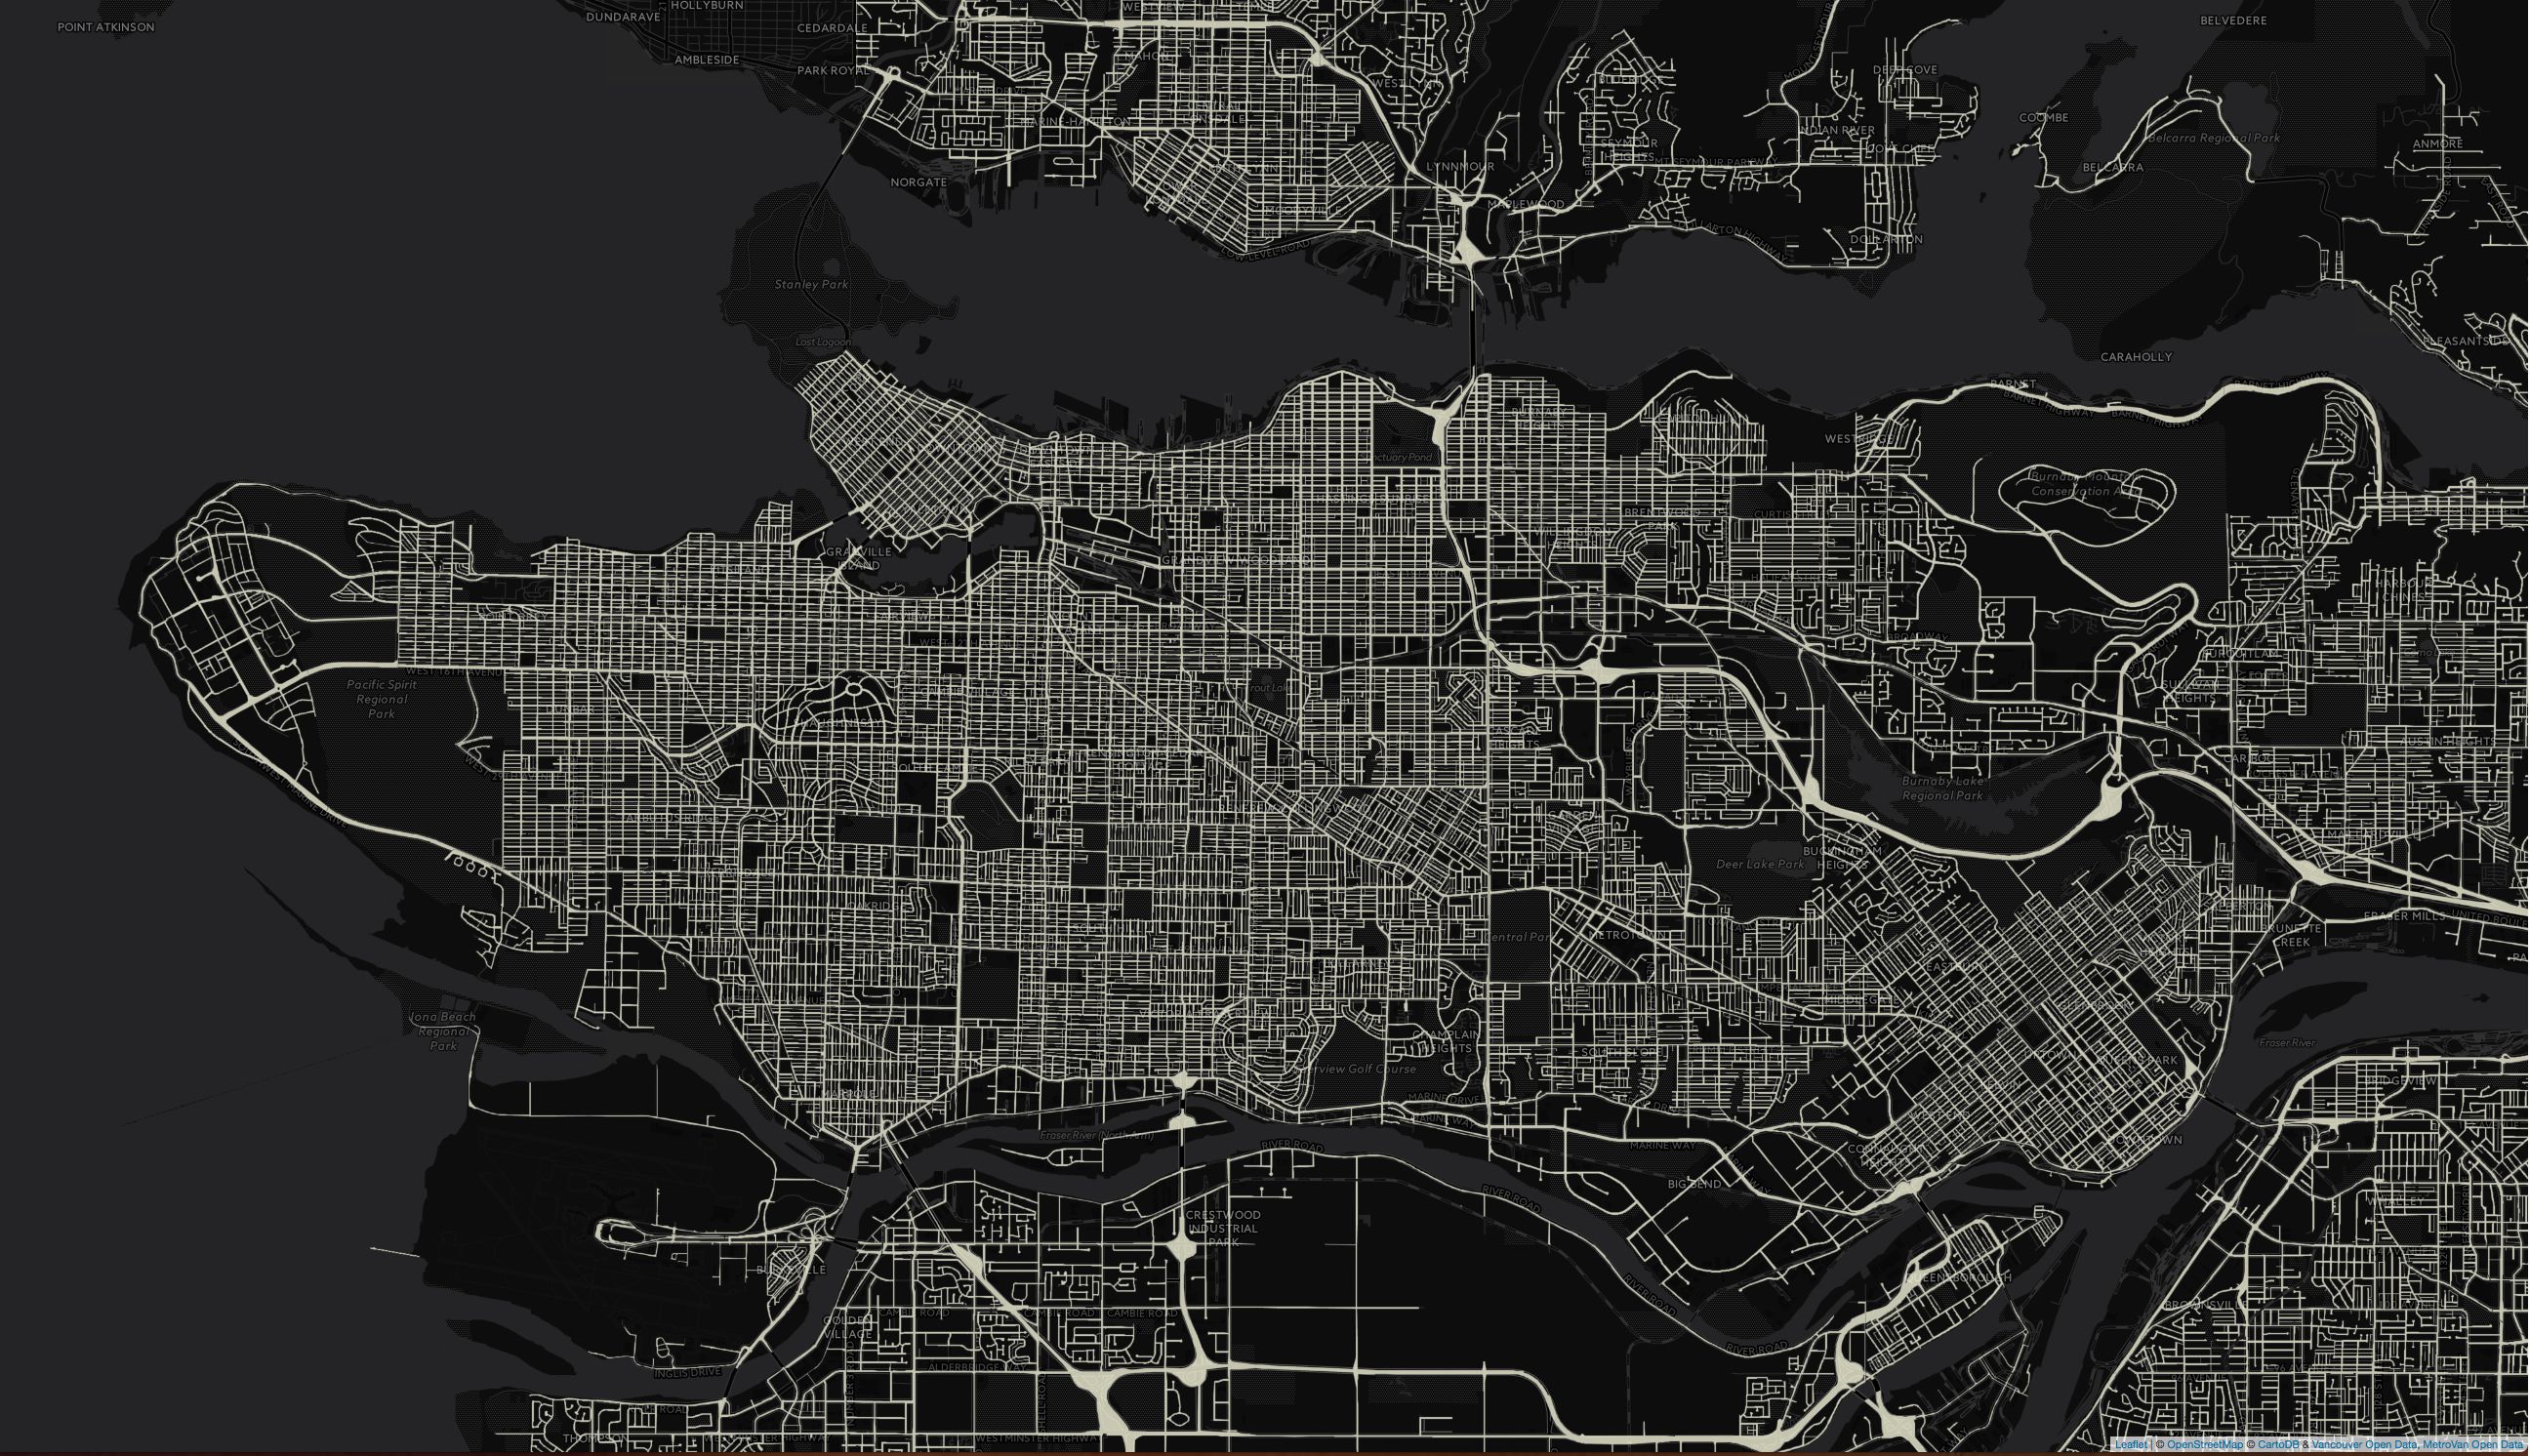 851px version of Vancouver roads